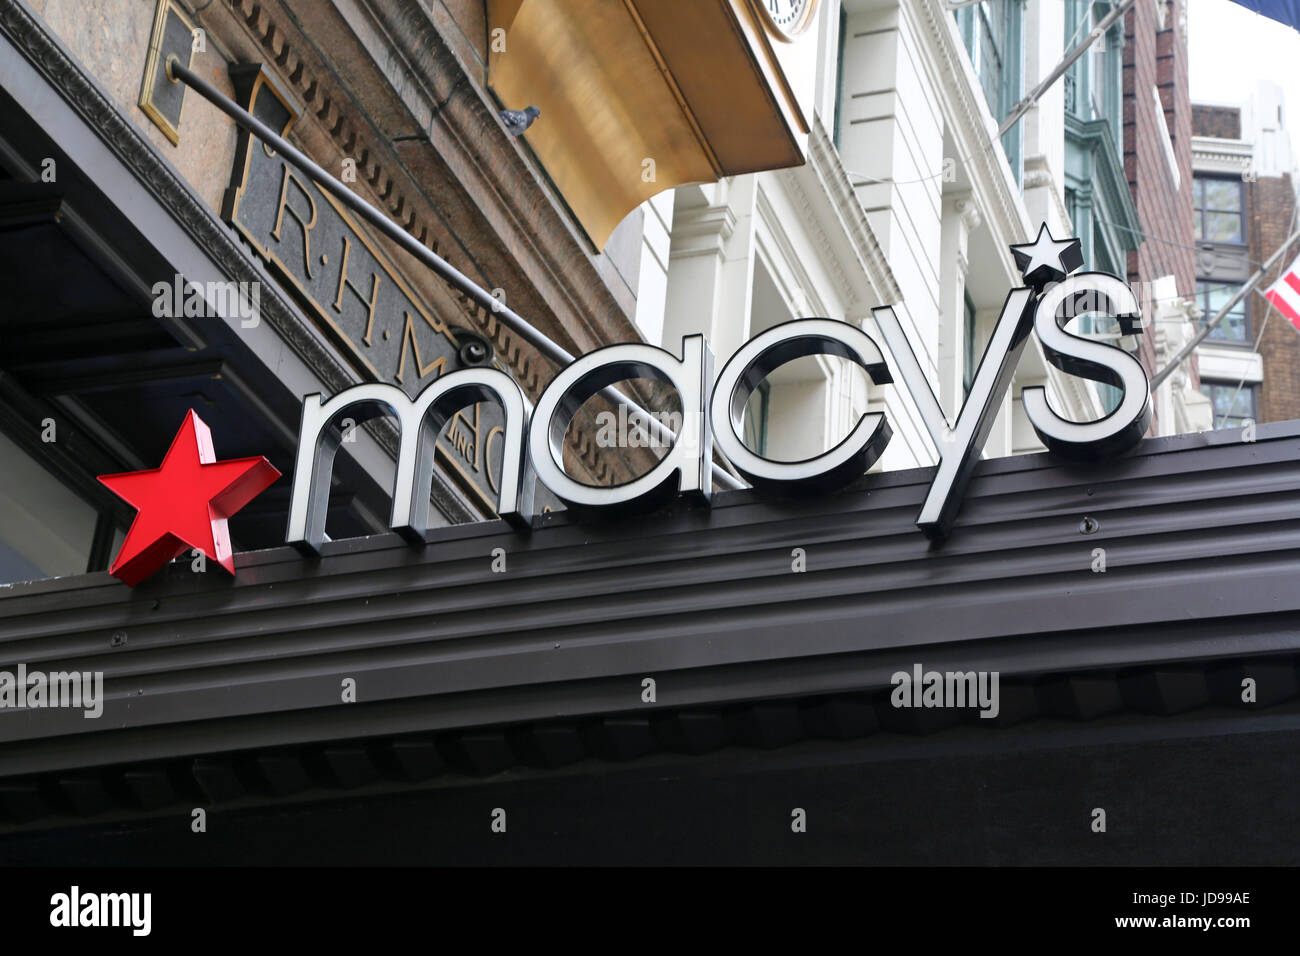 Signe du grand magasin Macy's, New York City, New York, USA Banque D'Images